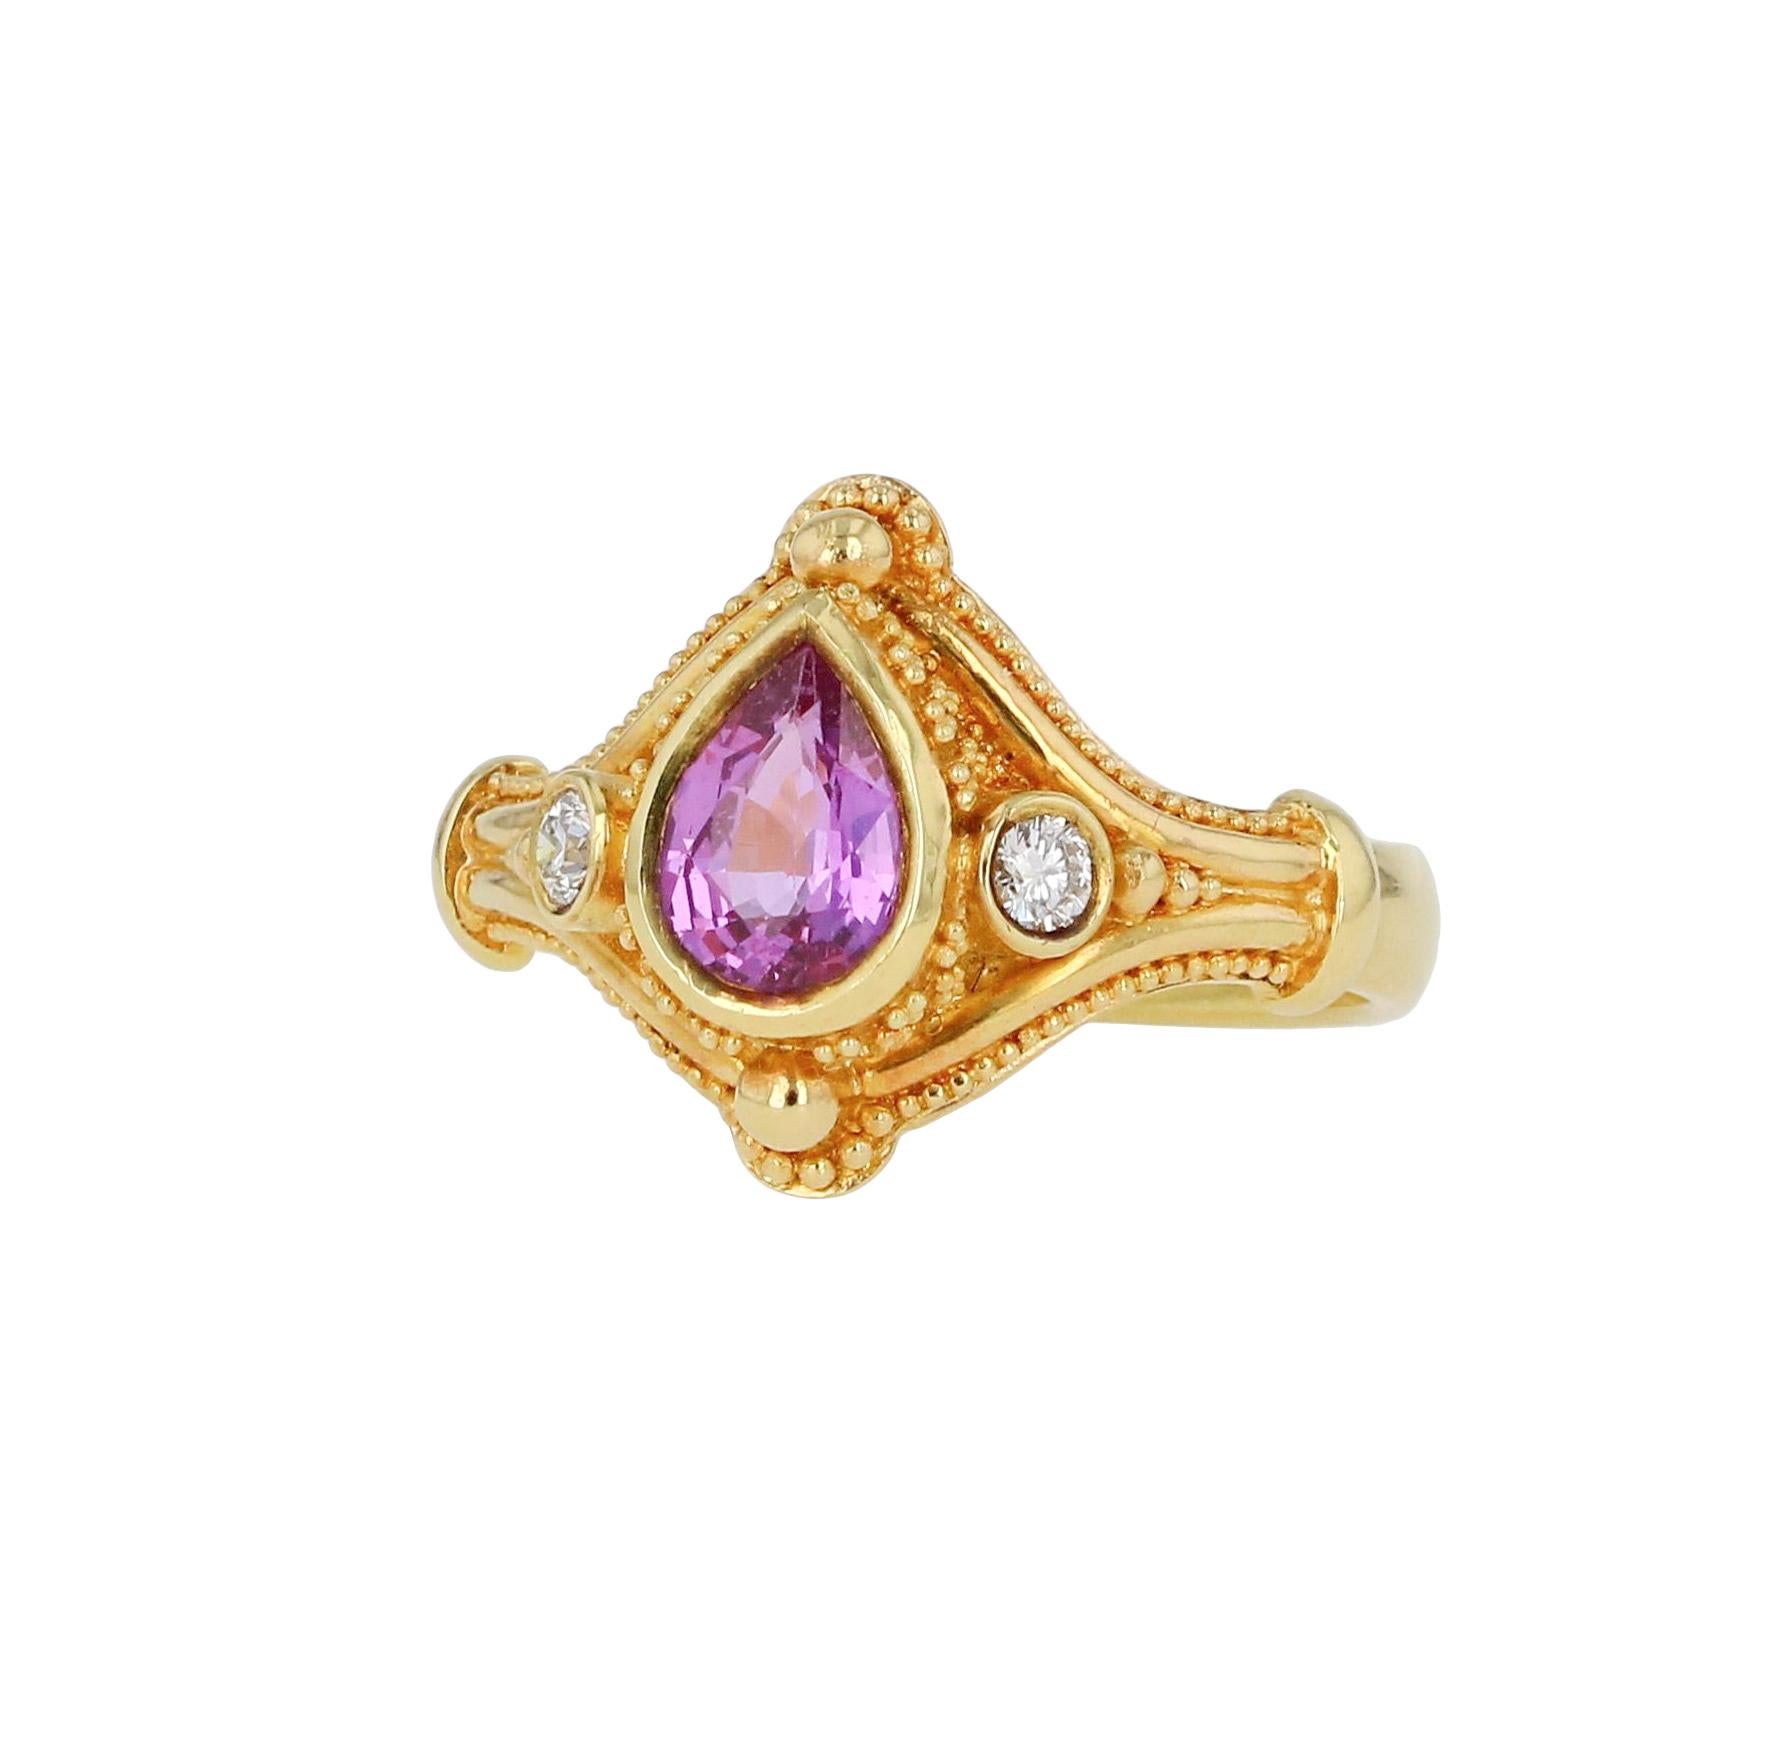 Kent Raible's Pink Sapphire and Diamond three-stone ring features a classic and tailored look with the elegance of fine detailing and Kent Raible's signature 18 karat gold granulation. The sapphire displays a beautiful pink with a hint of lavender